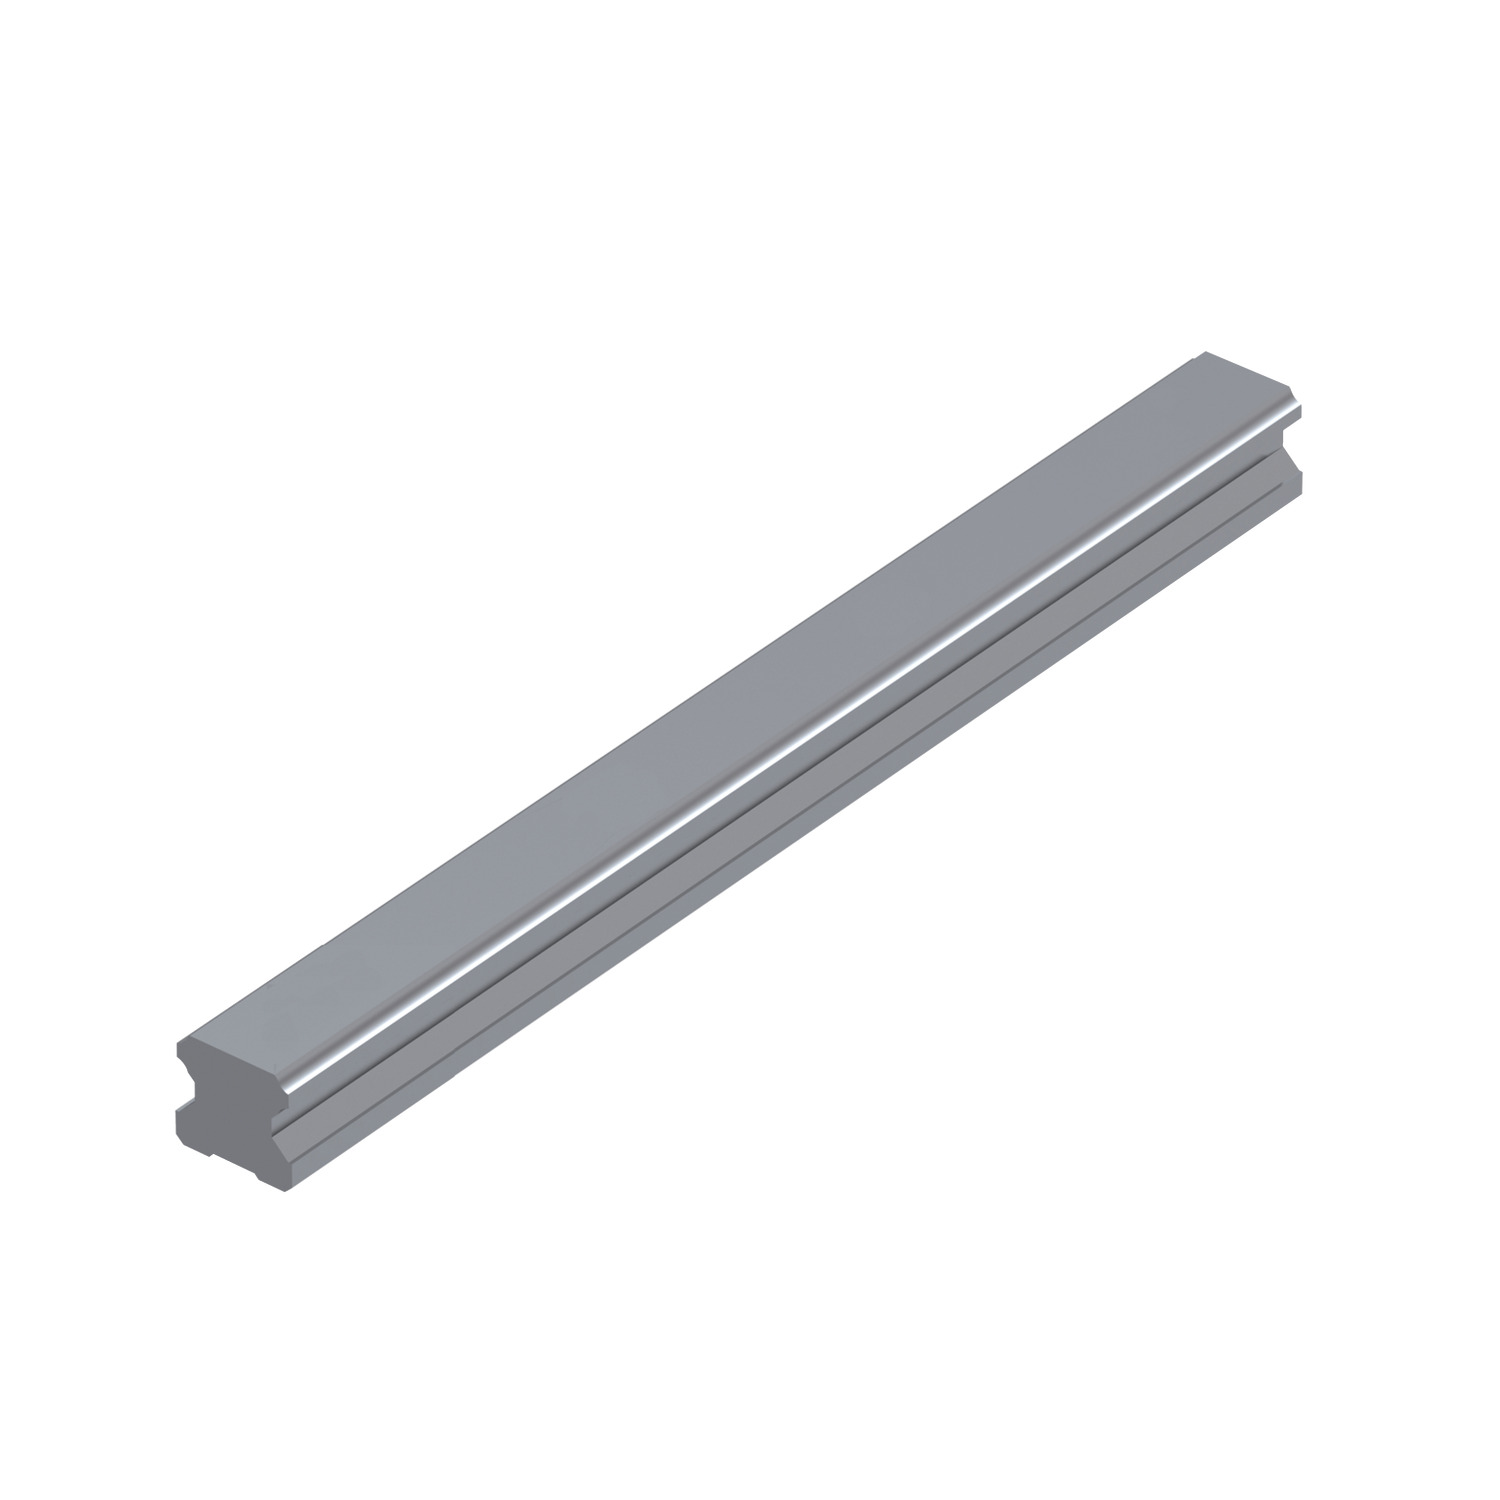 L1016.RF45-0255 Linear guide rail rear fixing 45mm 0255 Hardened and ground steel. EC:20168957 WG:05063055297608